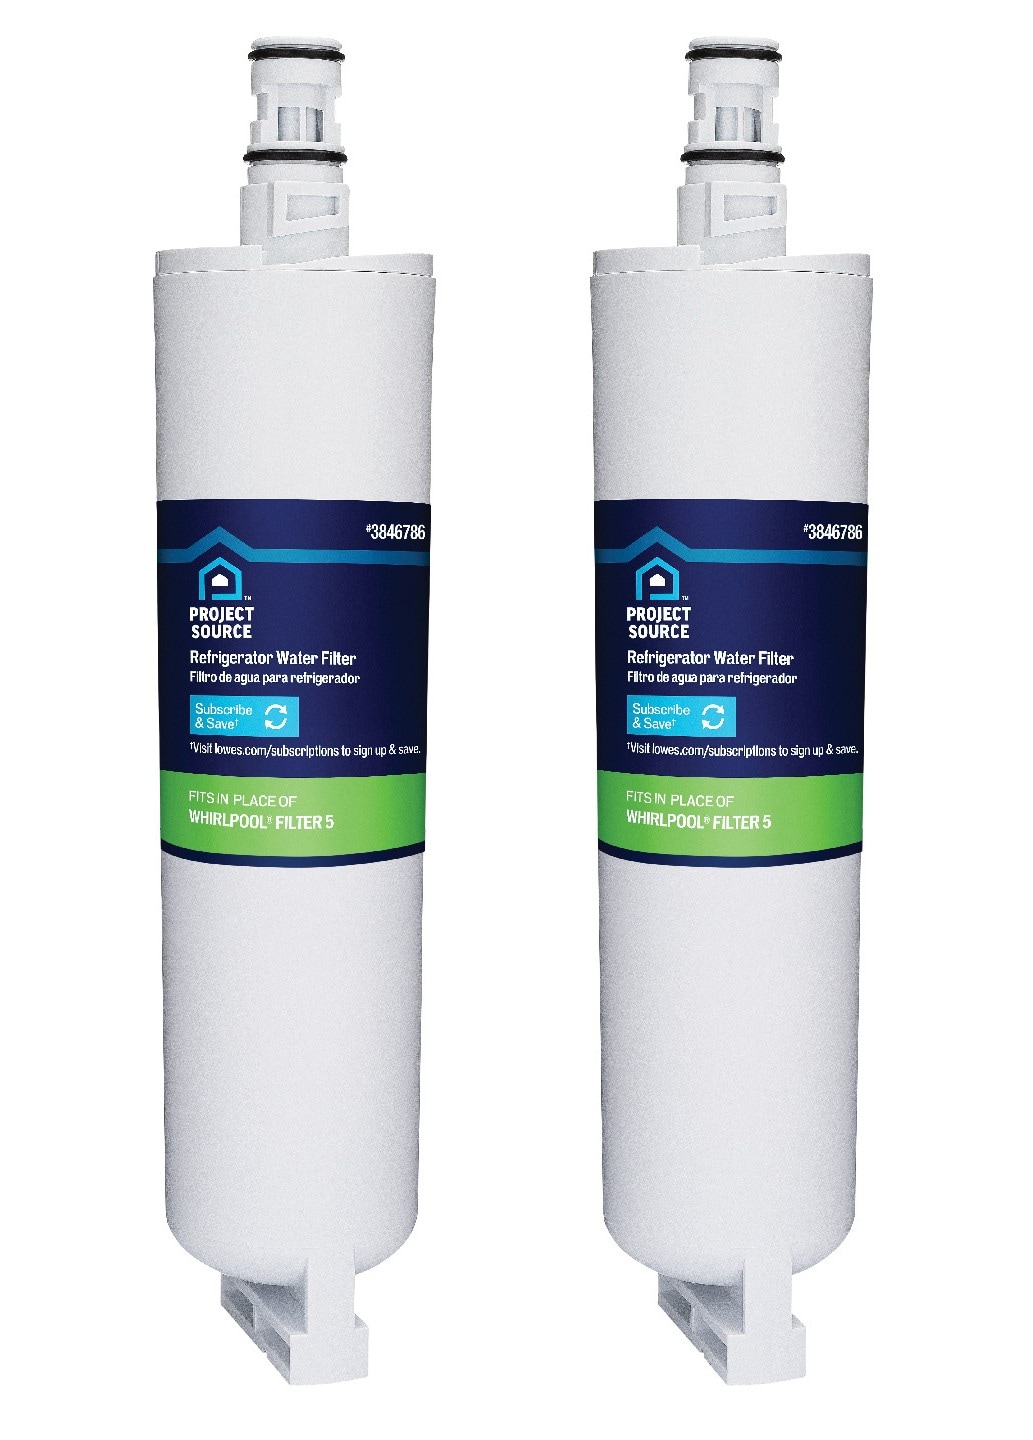 How Effective are Refrigerator Water Filters?